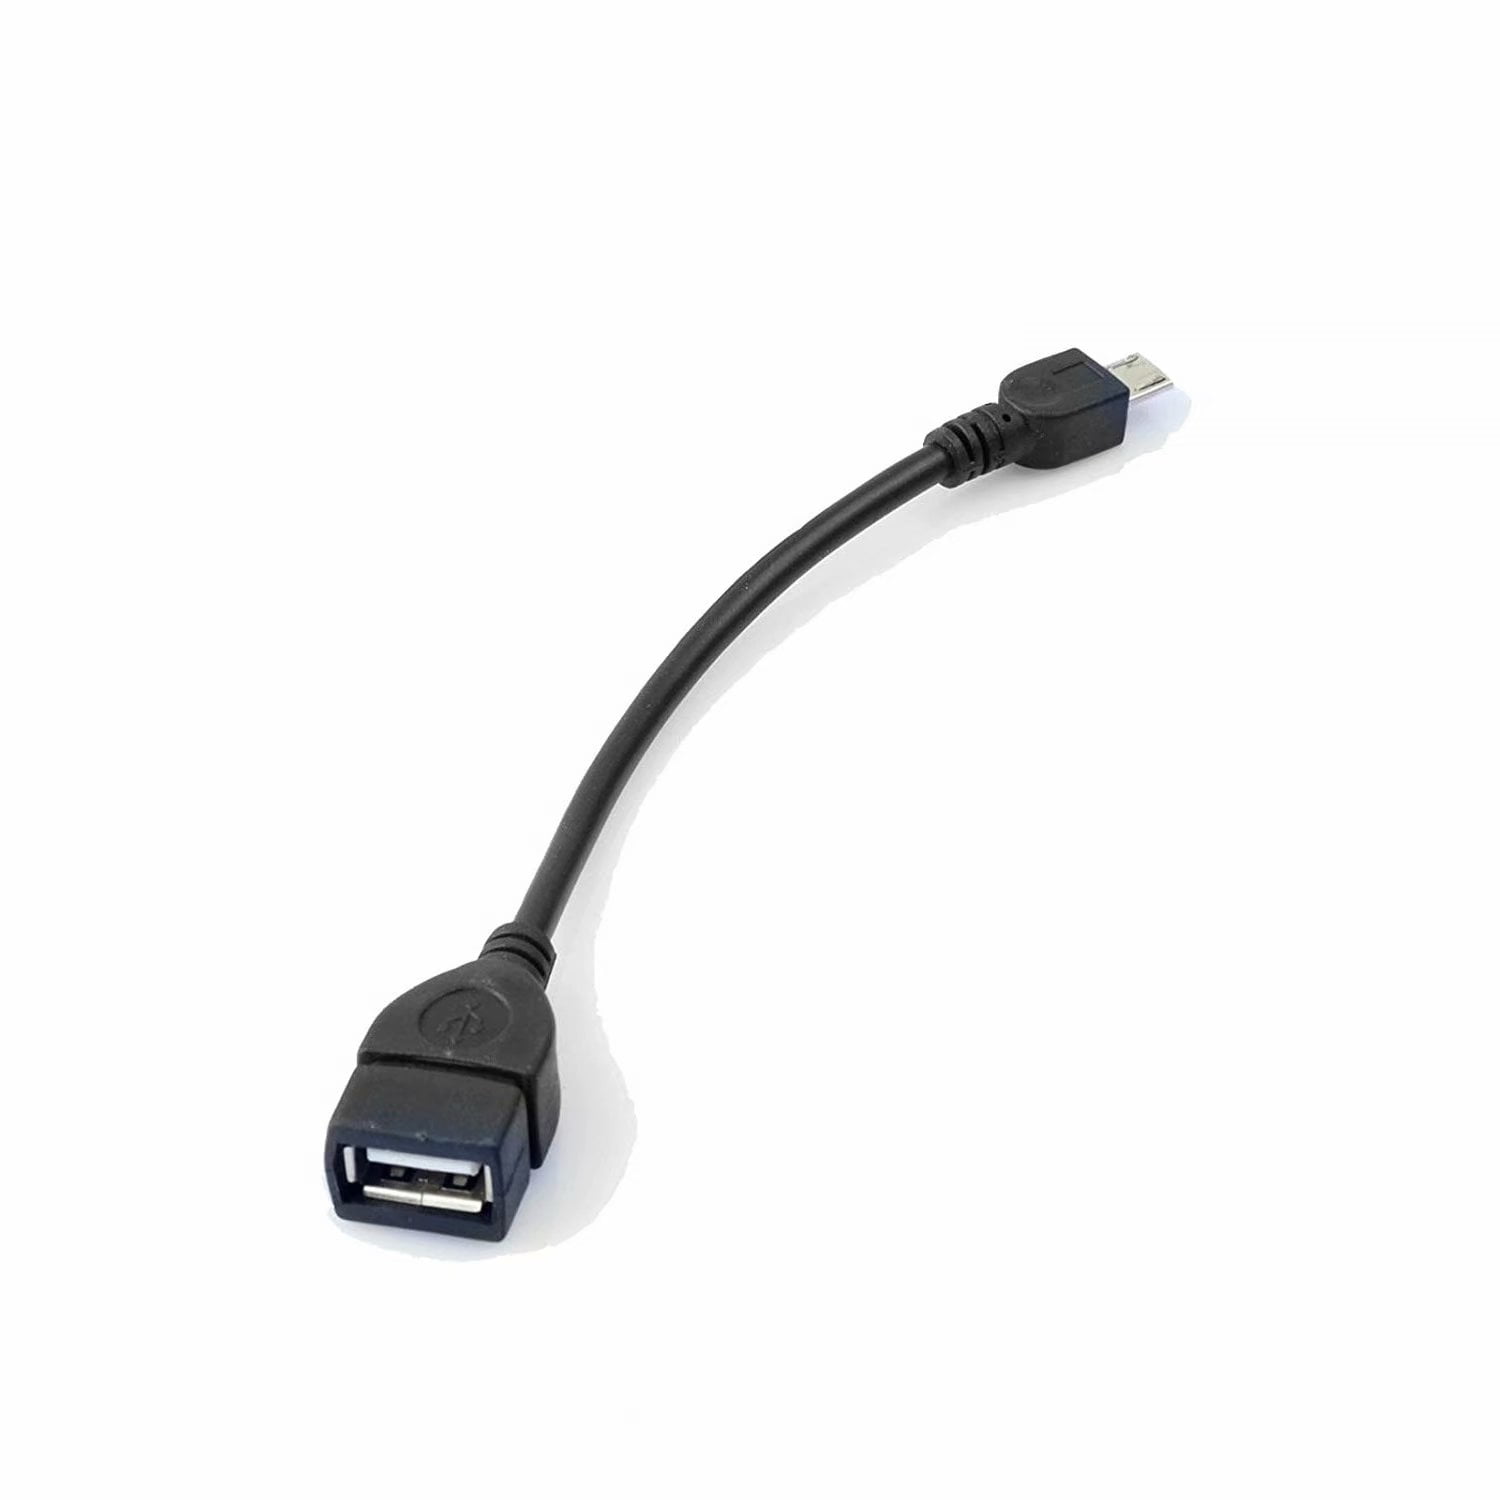 Verykool i674 OTG Micro-USB to USB 2.0 Right Angle Adapter for High Speed Data-Transfer Cable for connecting any compatible USB Accessory/Device/Drive/Flash/and truly On-The-Go! Black 